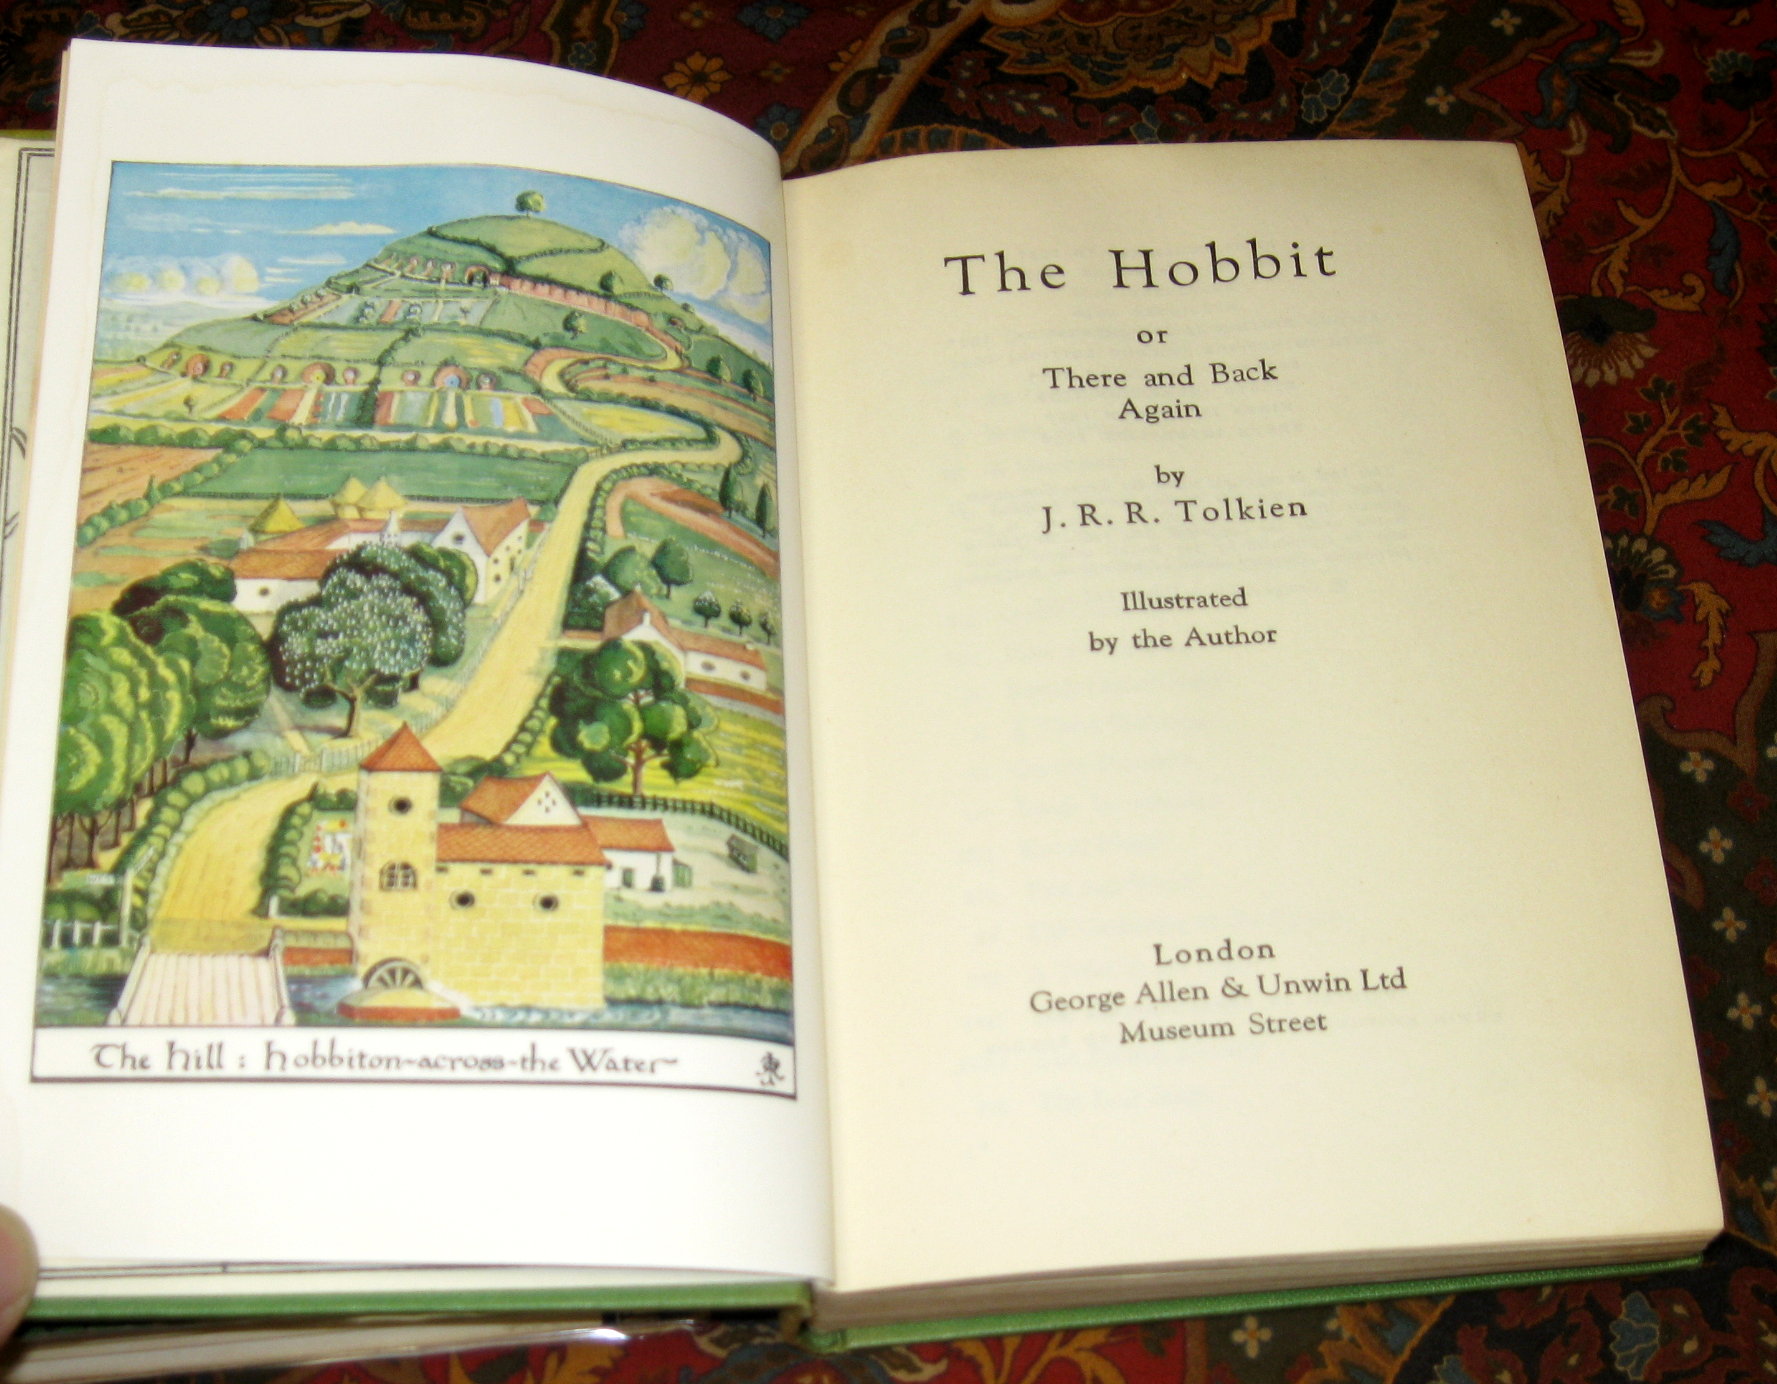 The Hill in the Hobbit